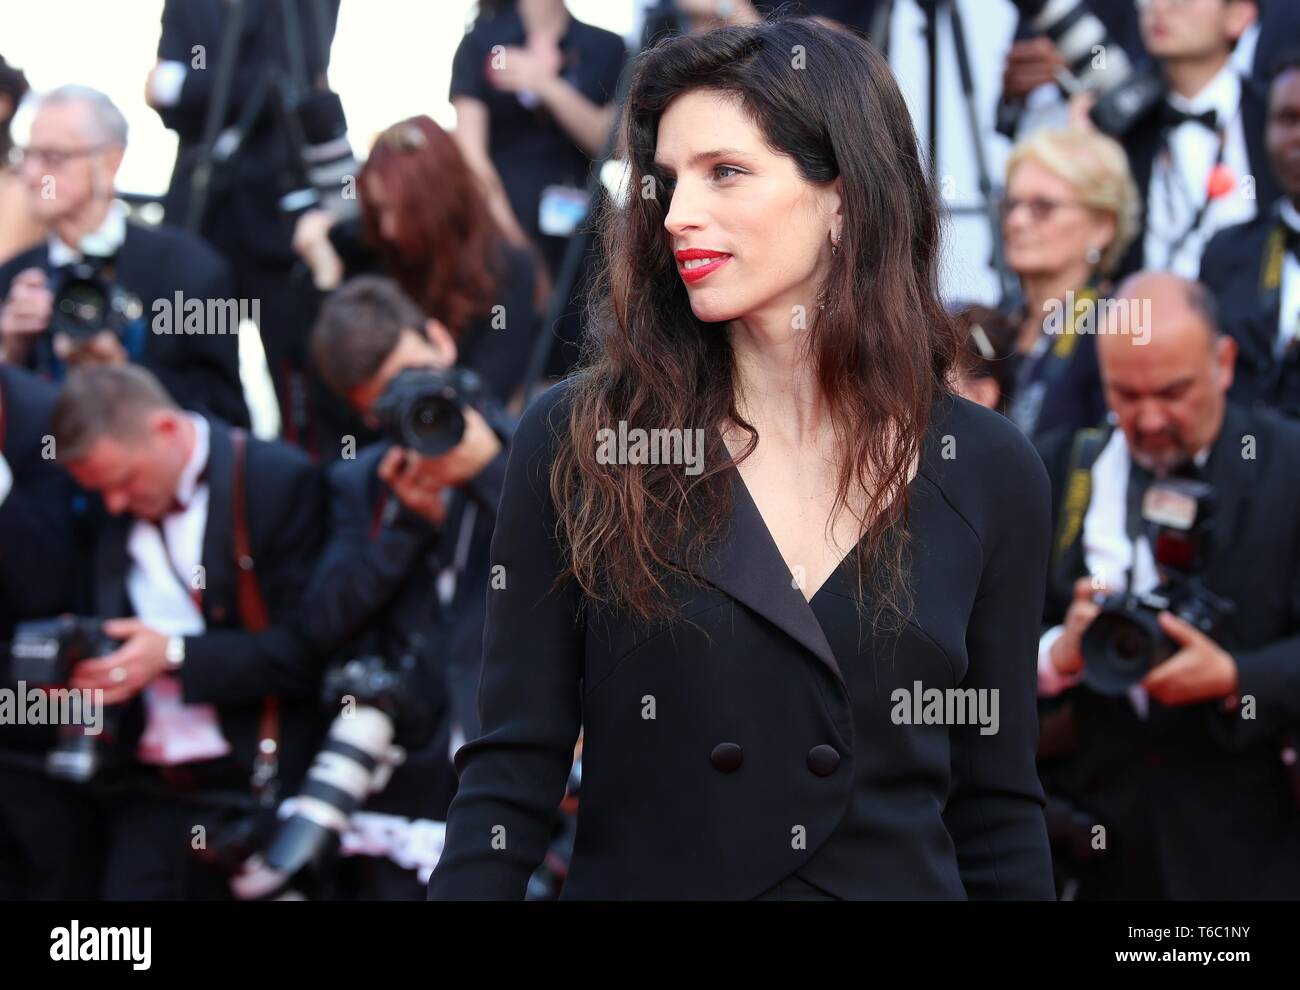 CANNES, FRANCE – MAY 23, 2017: Maiwenn Le Besco on the Cannes Film Festival 70th anniversary celebration red carpet (Photo: Mickael Chavet) Stock Photo